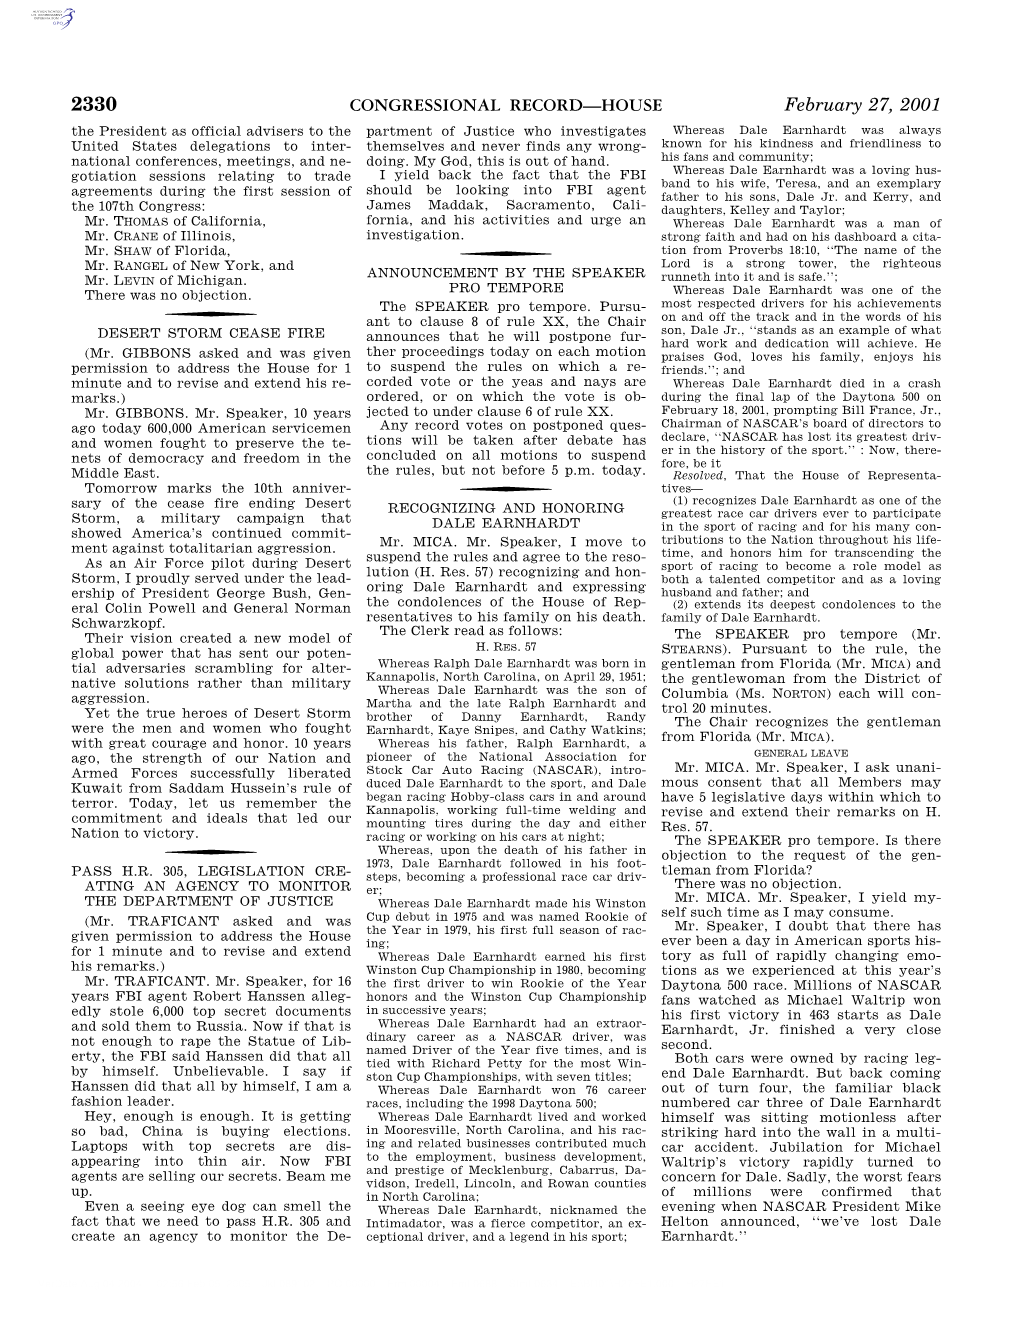 CONGRESSIONAL RECORD—HOUSE February 27, 2001